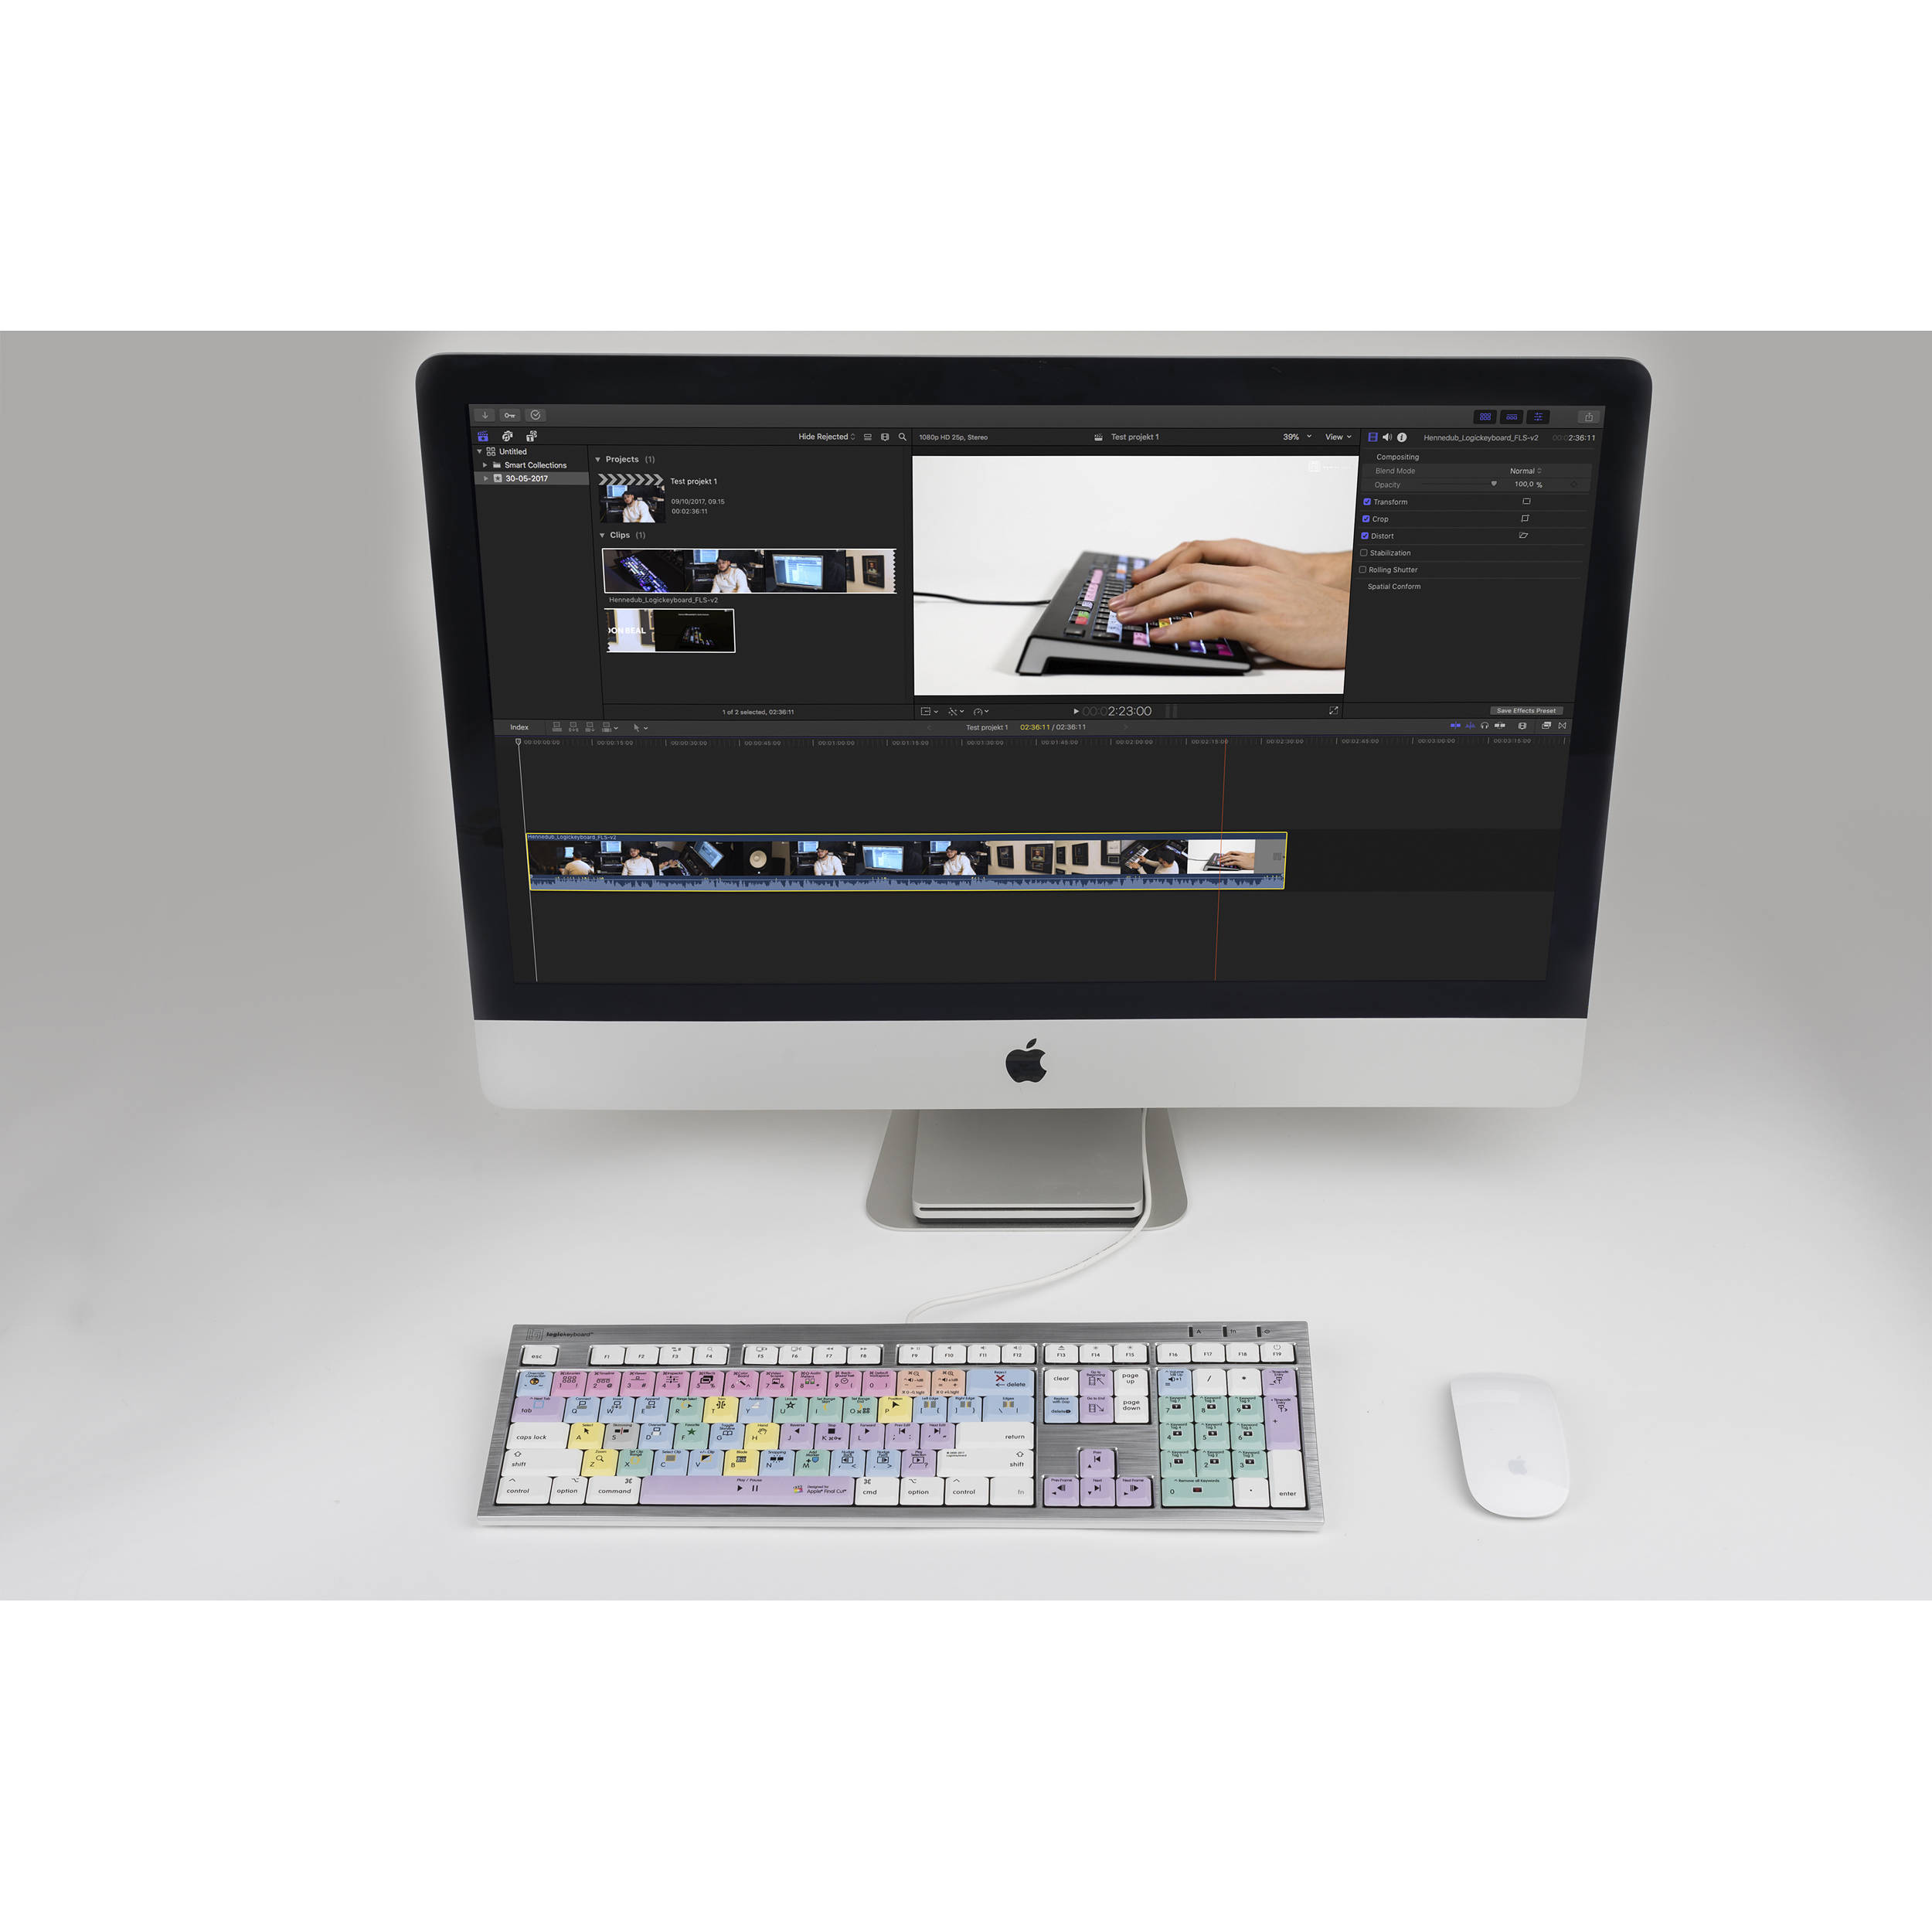 LogicKeyboard keyboard Designed for Apple Final Cut Pro X Compatible with macOS Part Number LKBU-FCPX10-CWMU-US